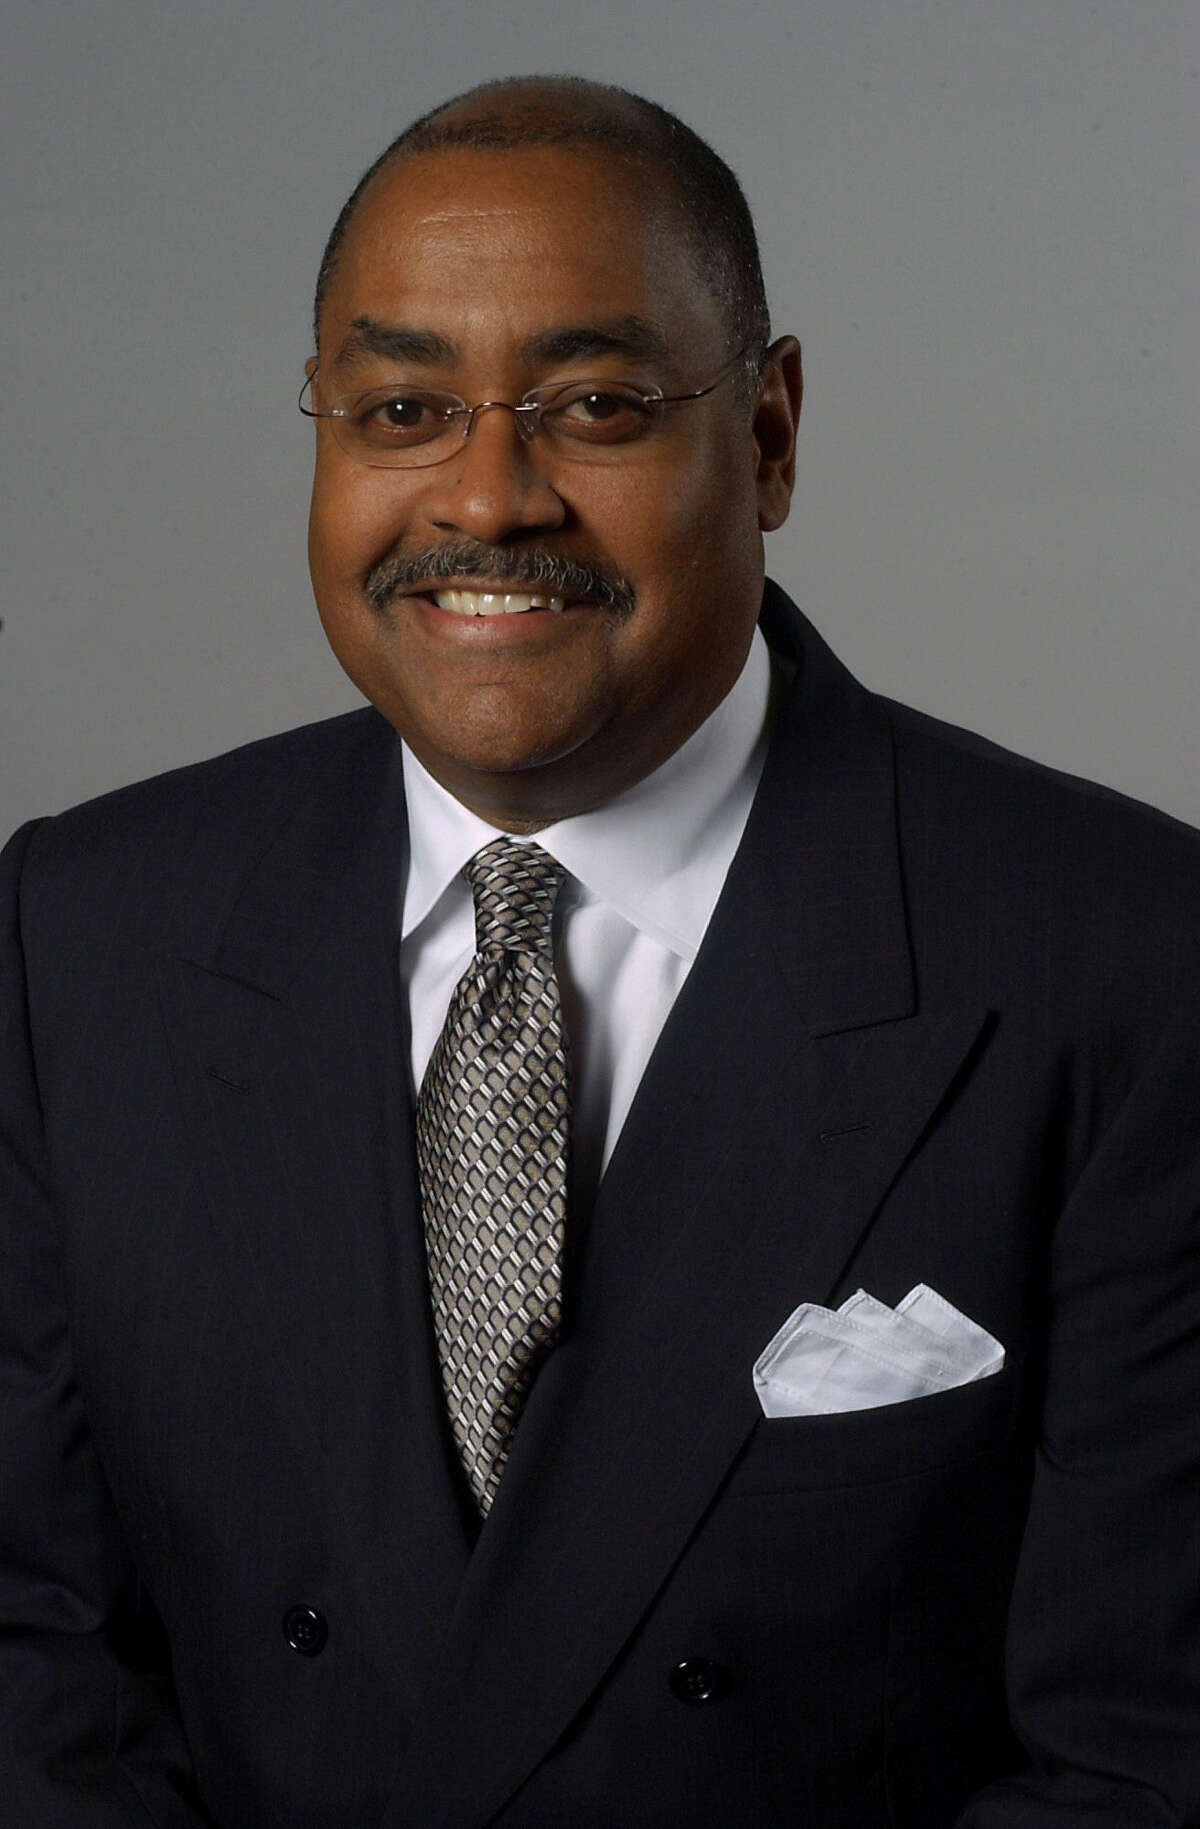 State Sen. Rodney Ellis, D-Houston, chairs the board of directors for the Innocence Project and has authored numerous criminal justice reforms.